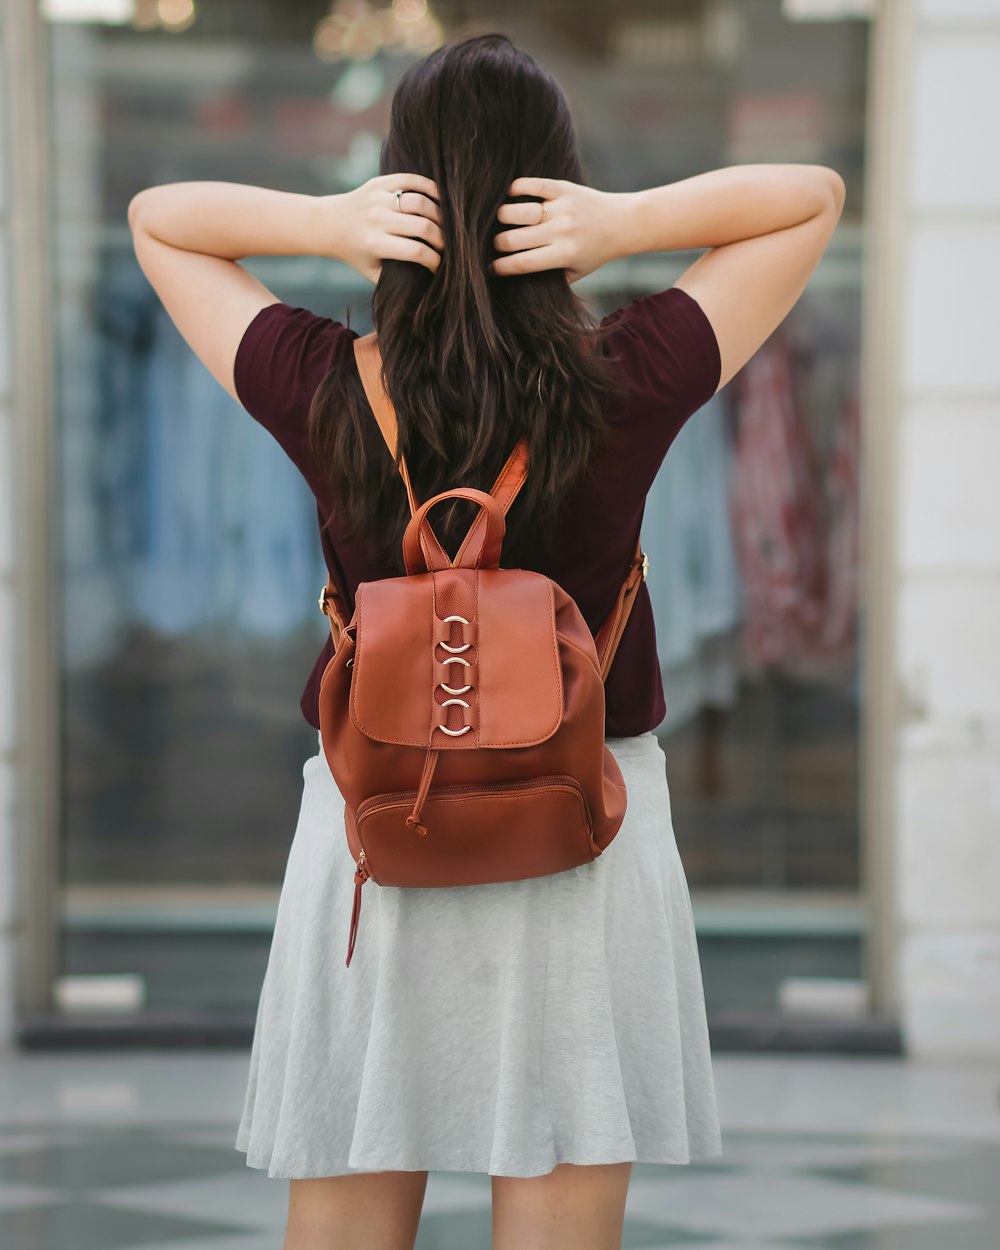 30,000+ Girl With A Bag Pictures | Download Free Images on Unsplash